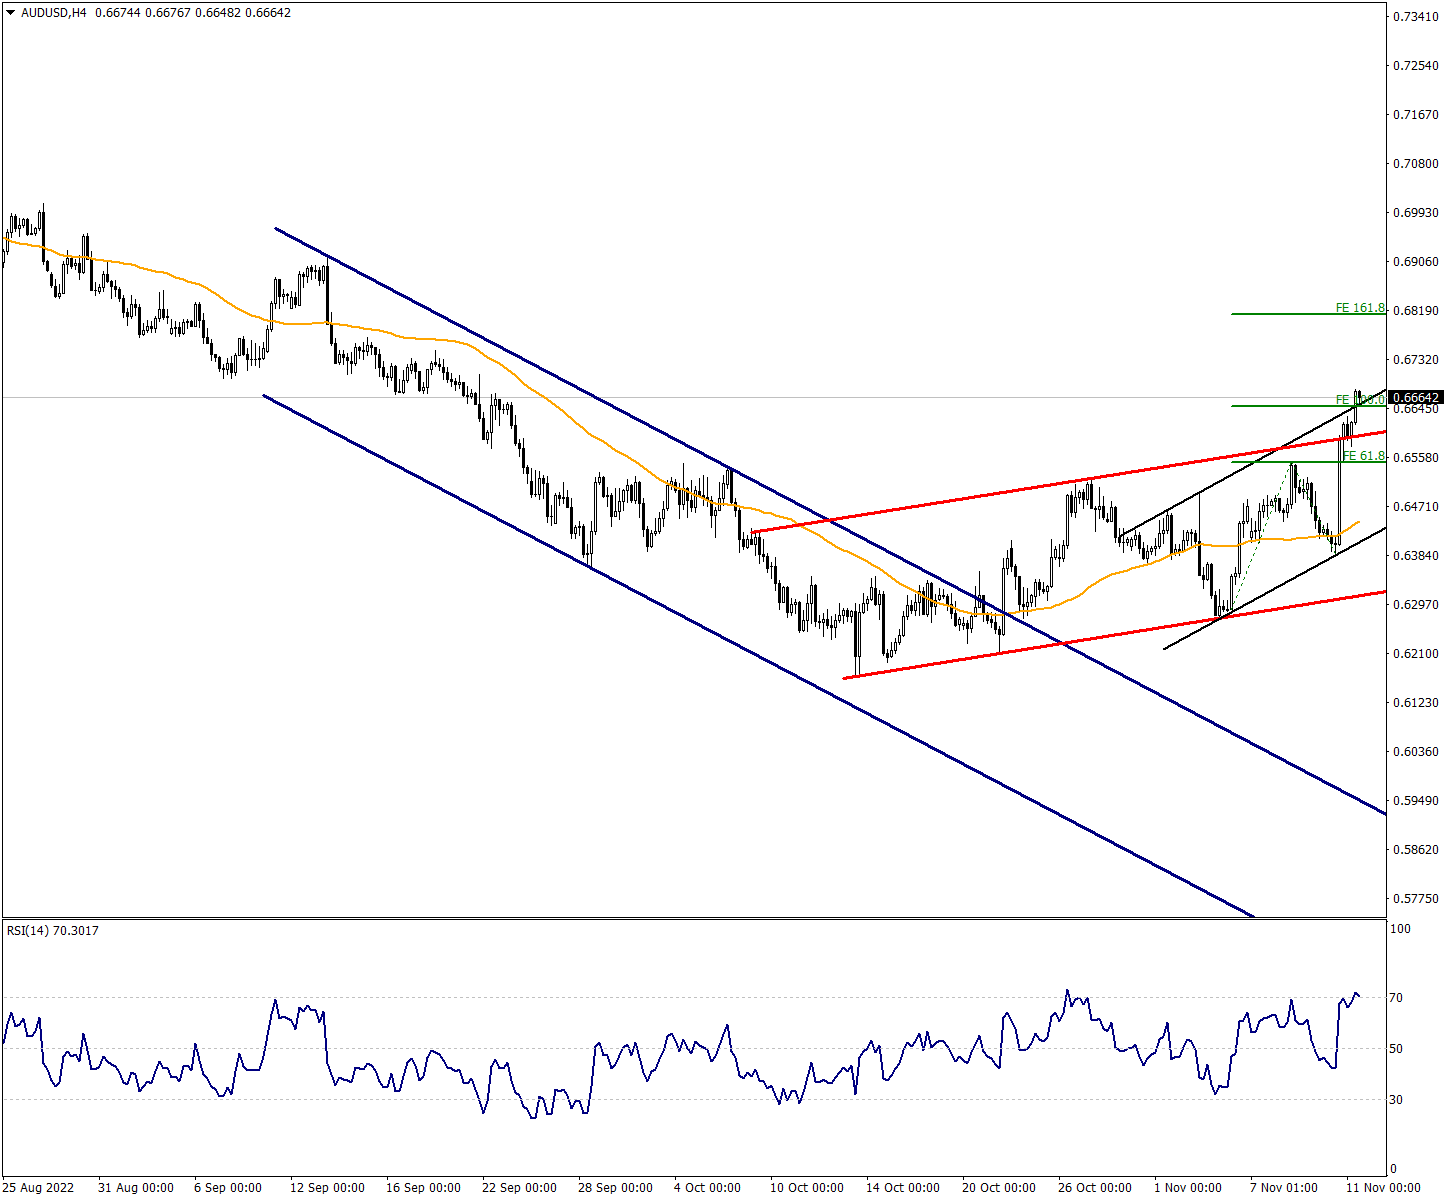 Upward Expansion Accelerated in AUDUSD